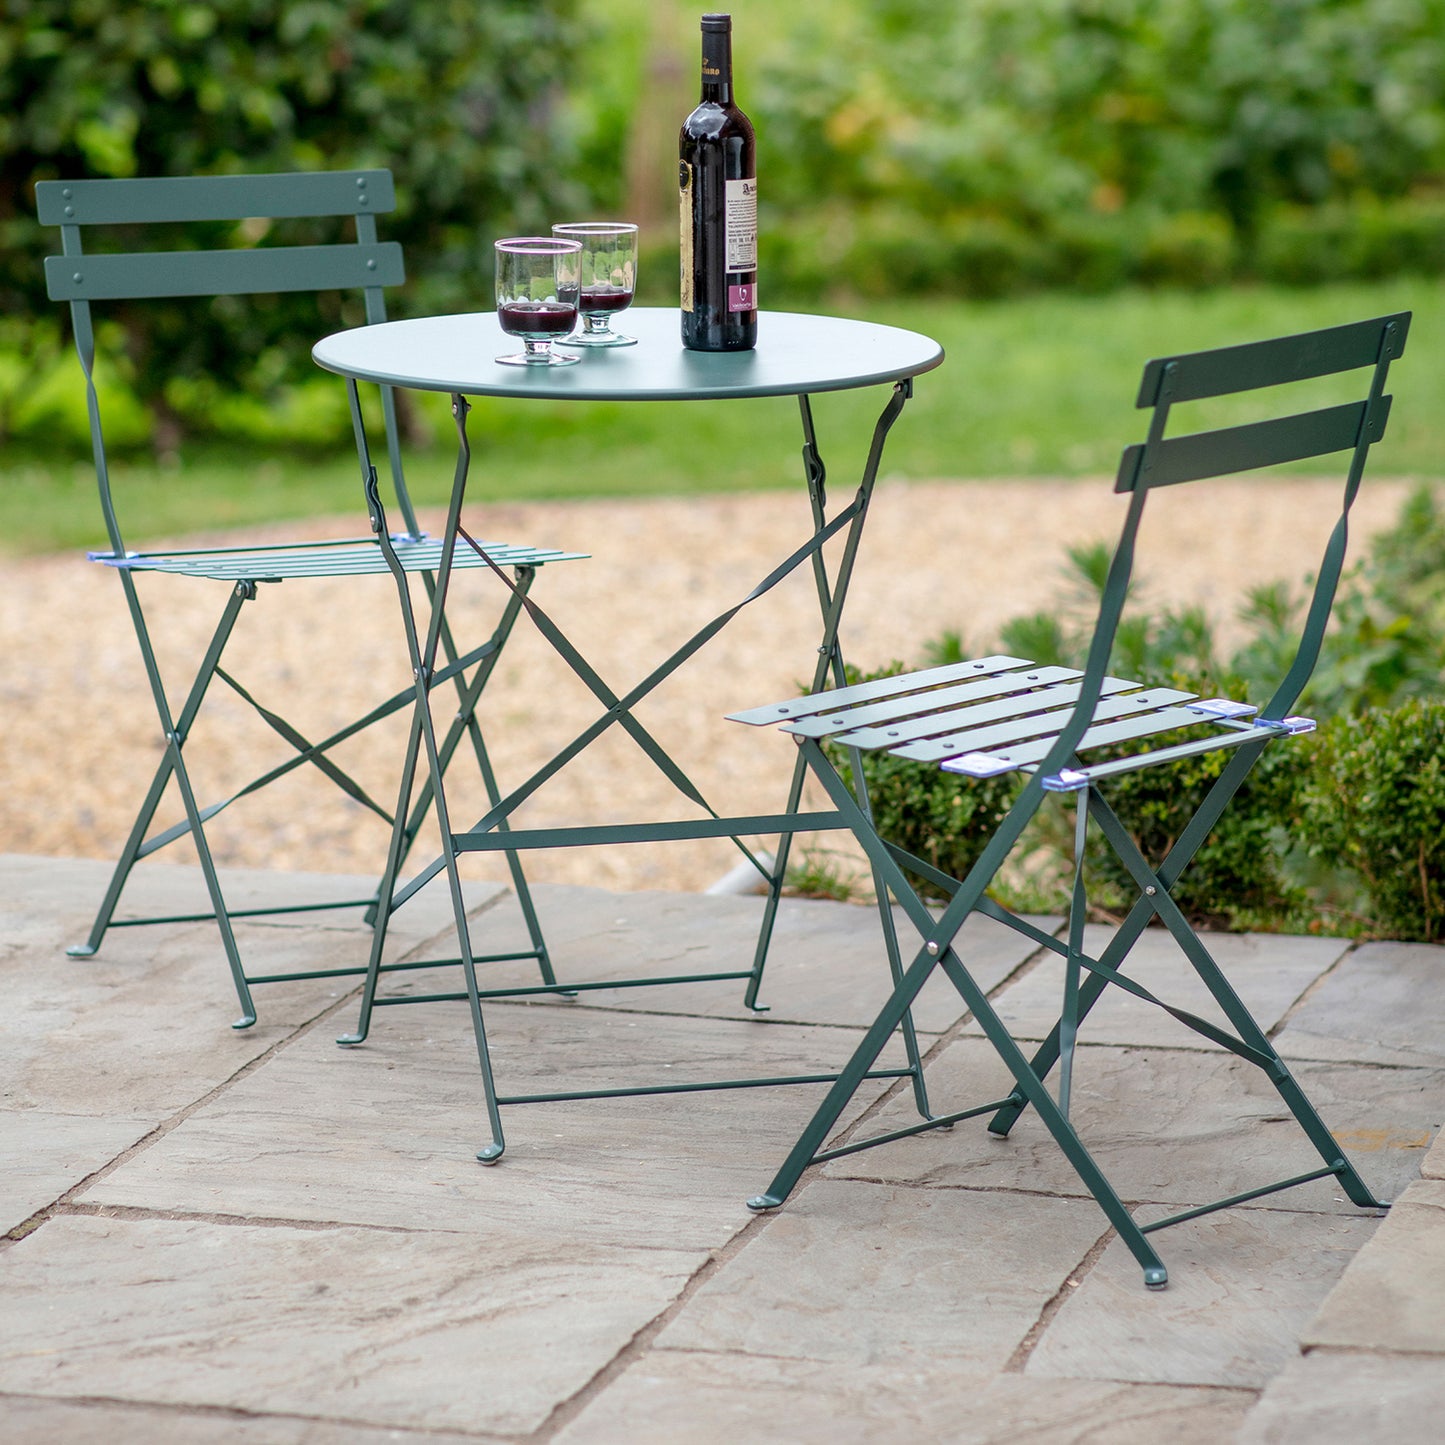 Rive Droite Bistro Outdoor Small Set in Forest Green Steel by Garden Trading